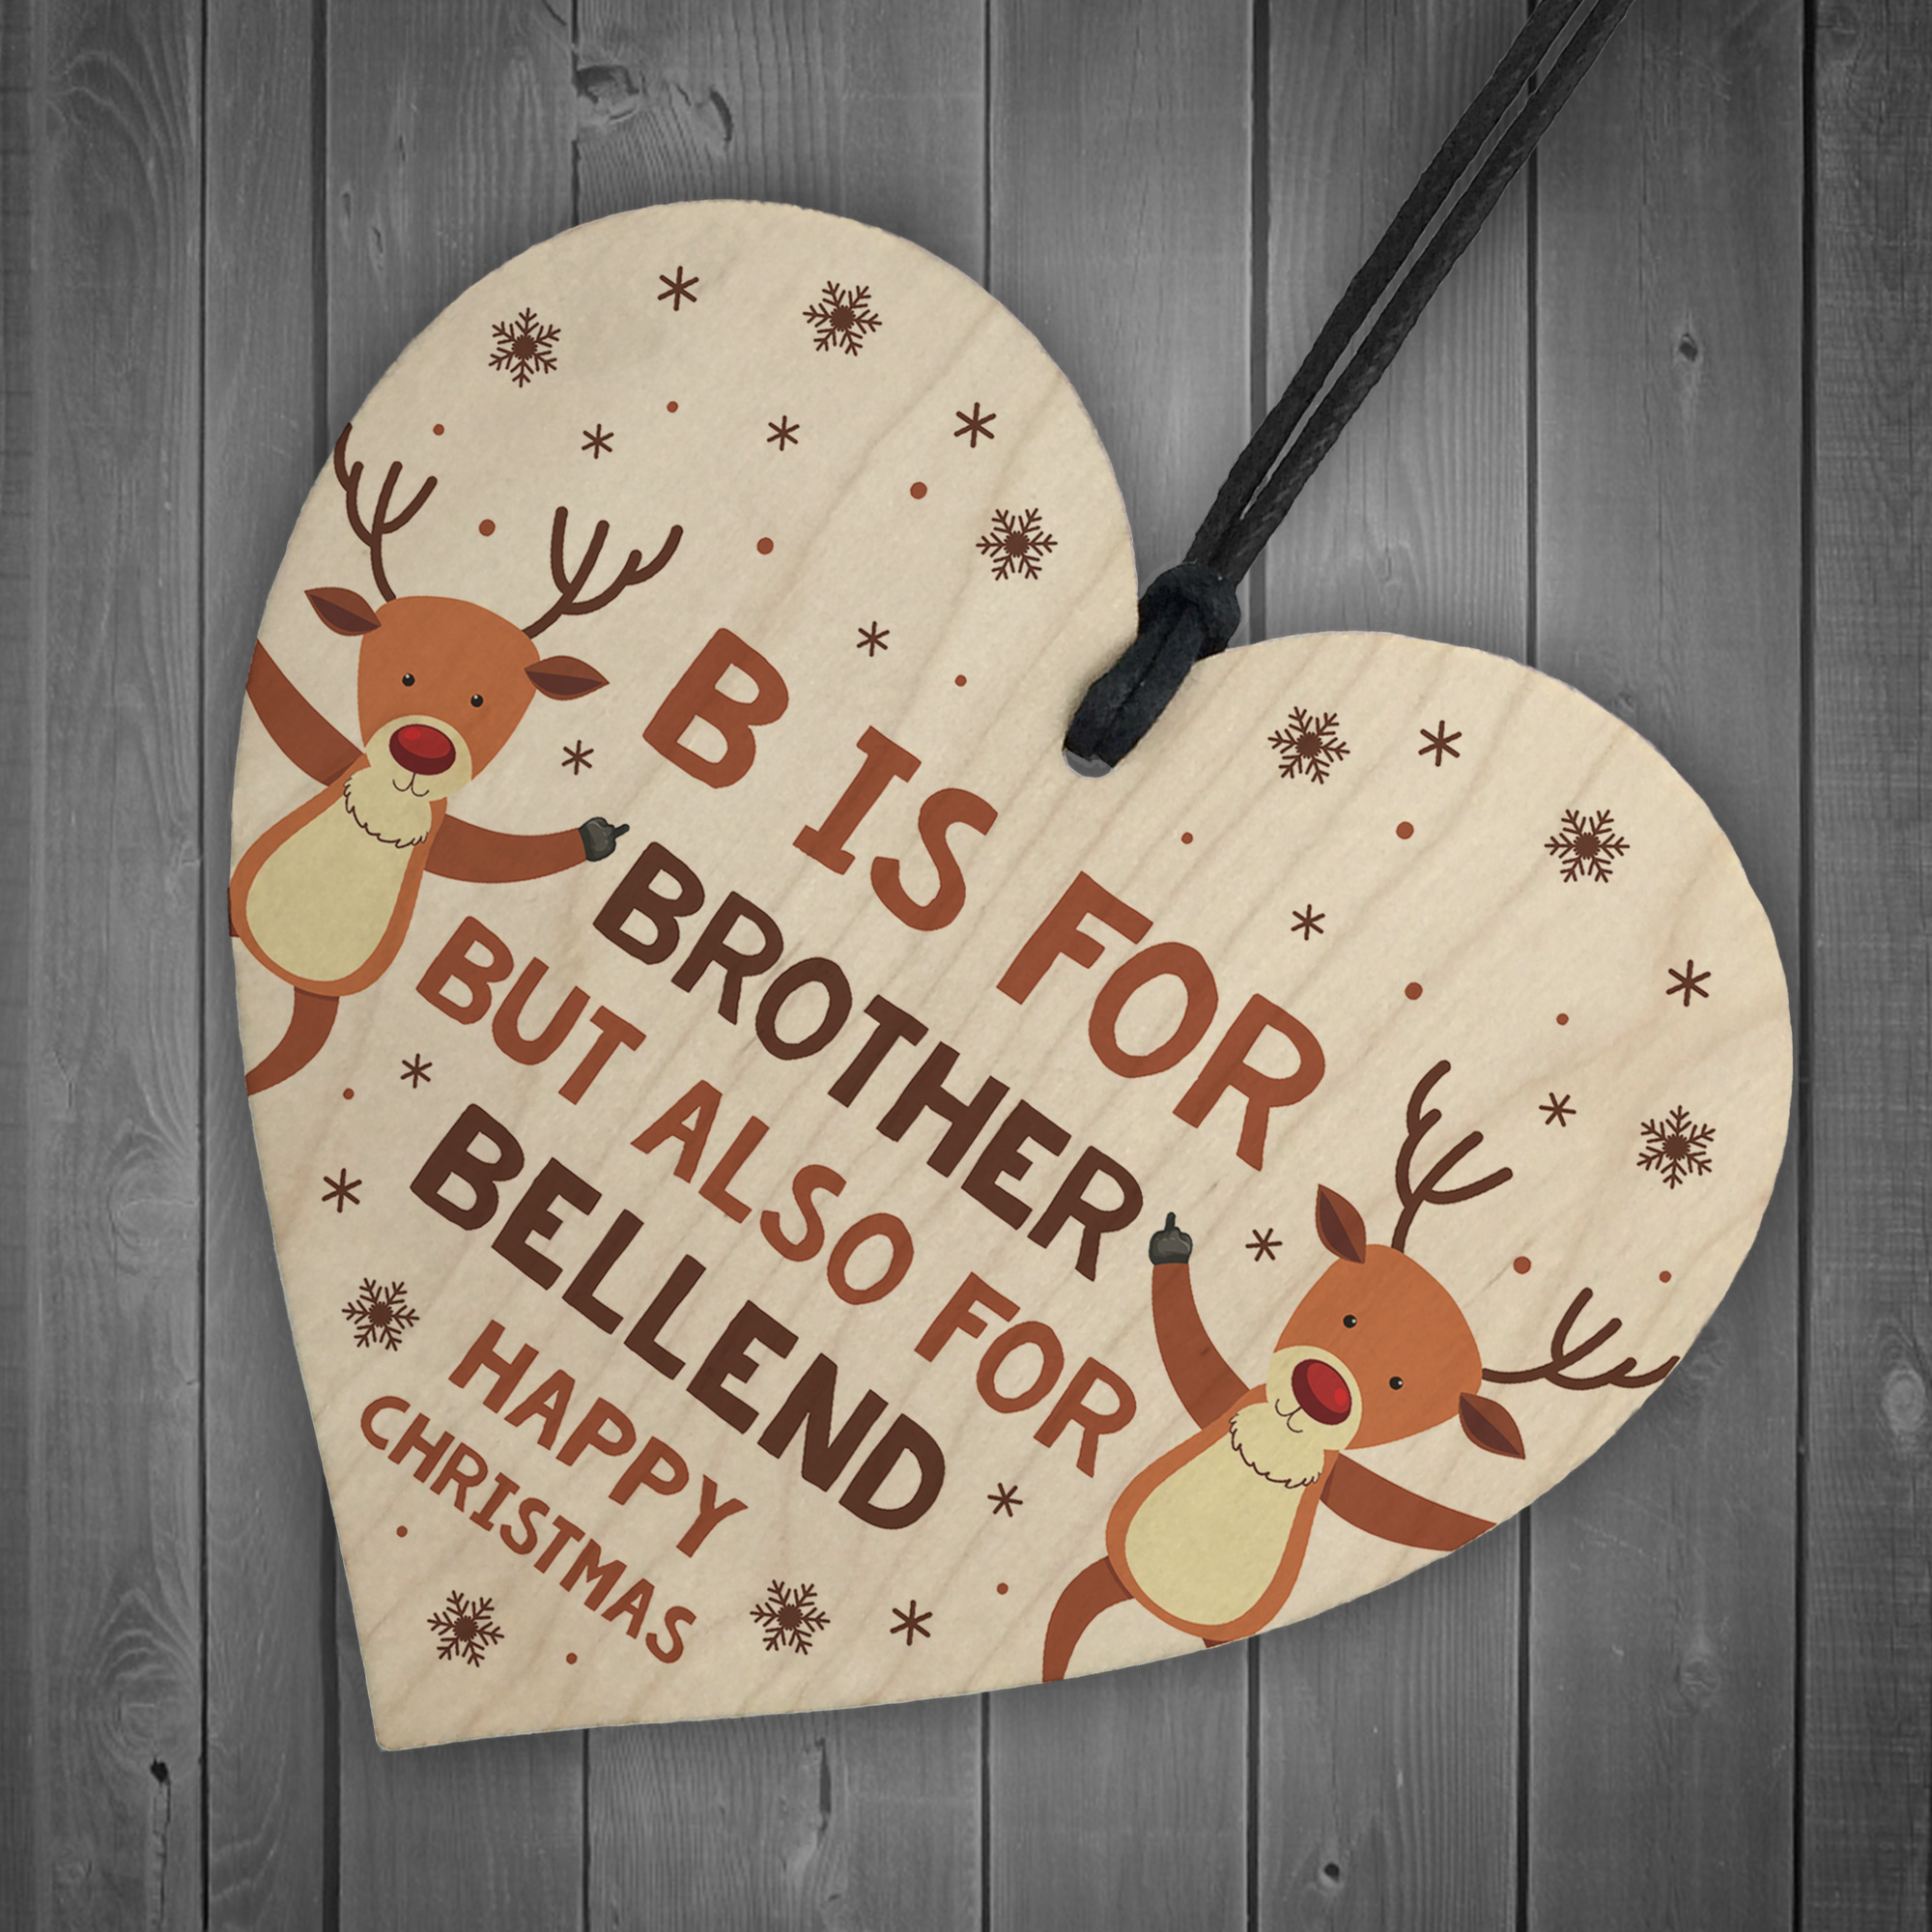 Funny Rude Christmas Gifts For Brother Novelty Wood Heart Gift Idea